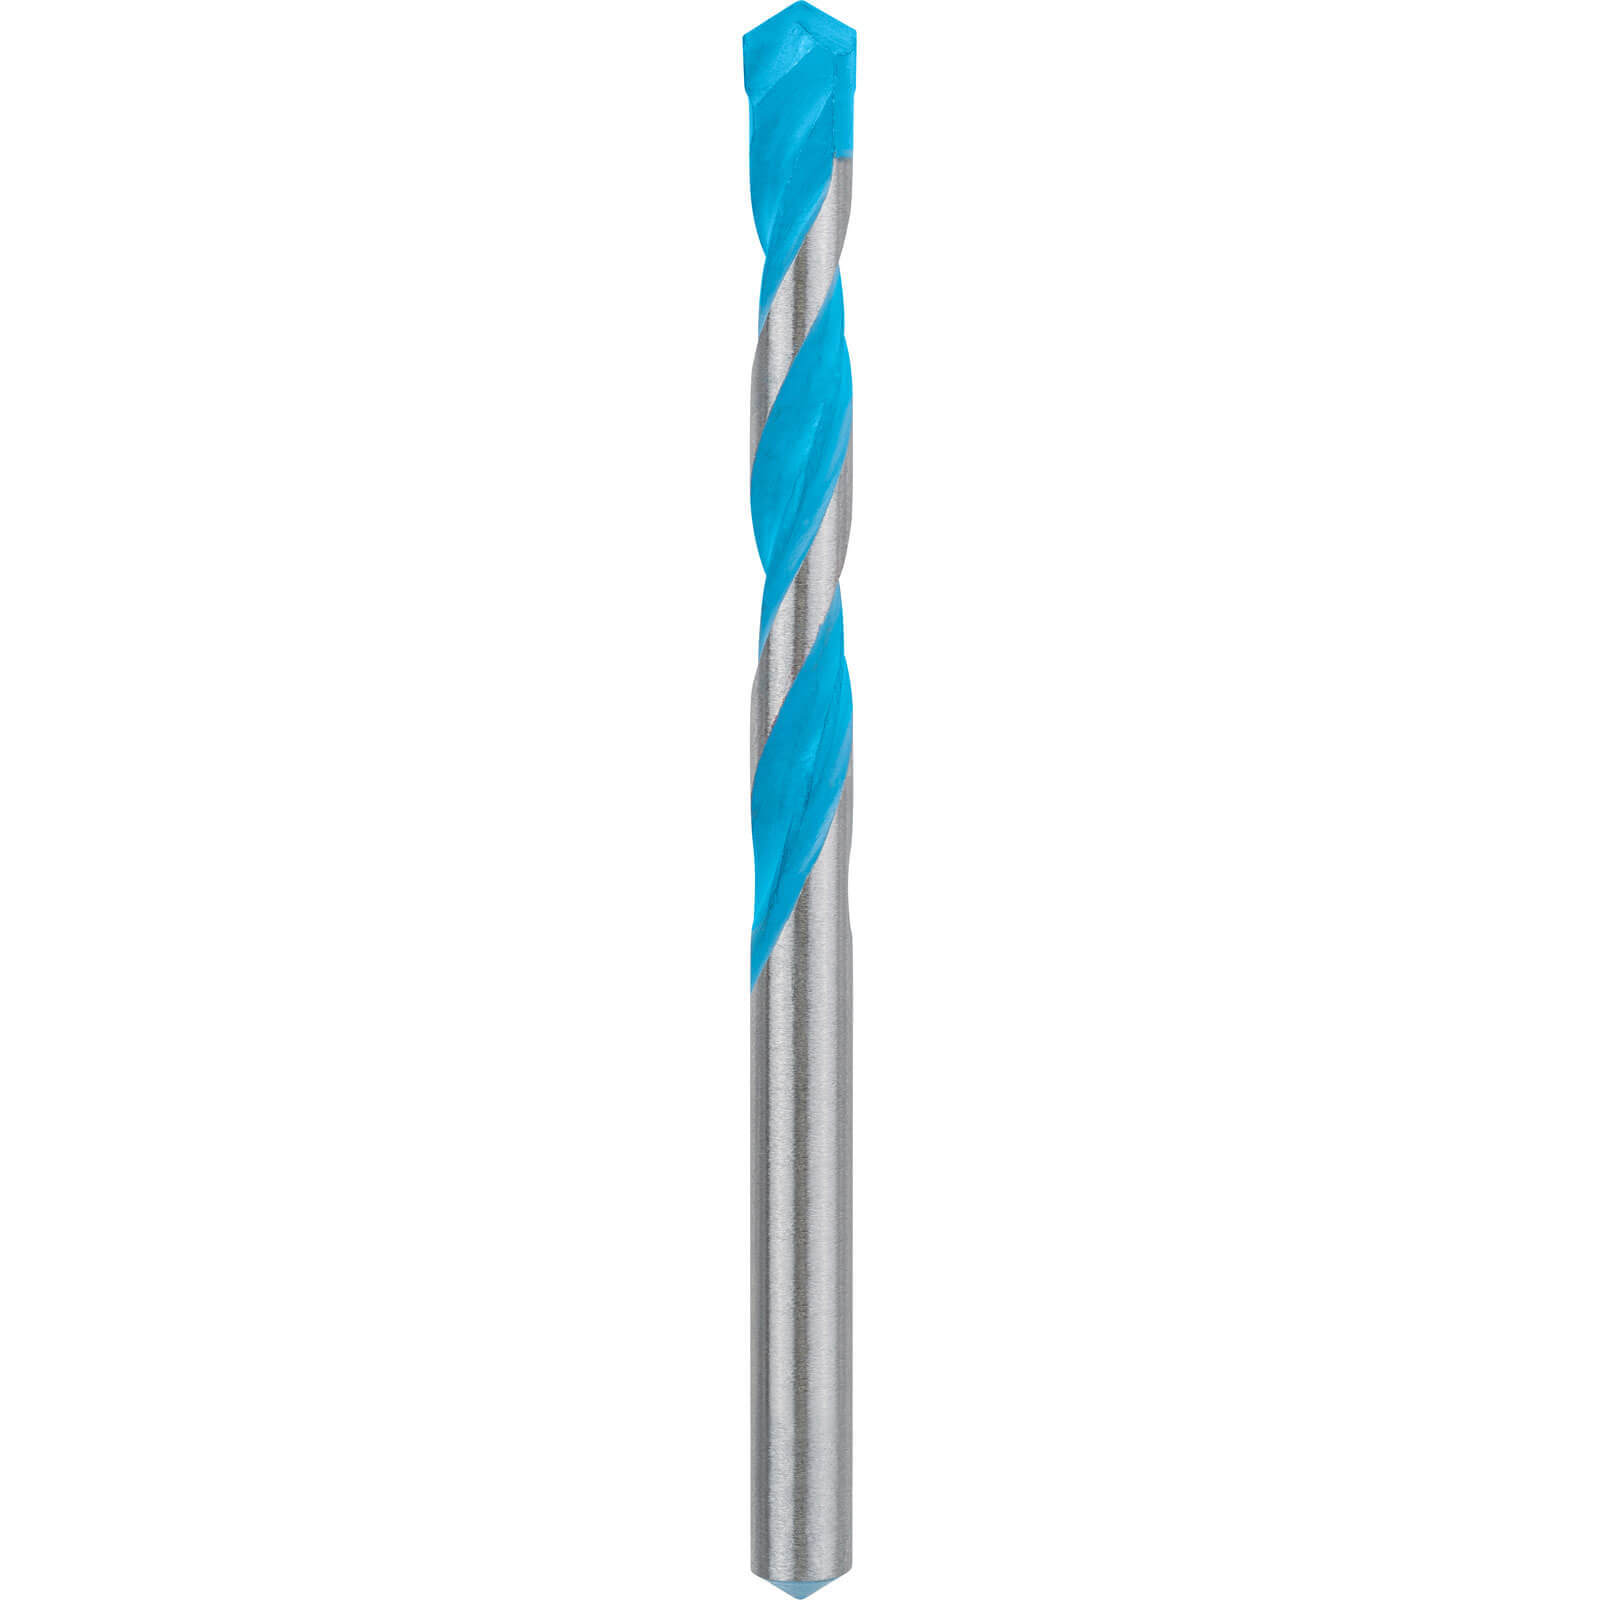 Image of Bosch Expert CYL-9 Multi Construction Drill Bit 7mm 100mm Pack of 1